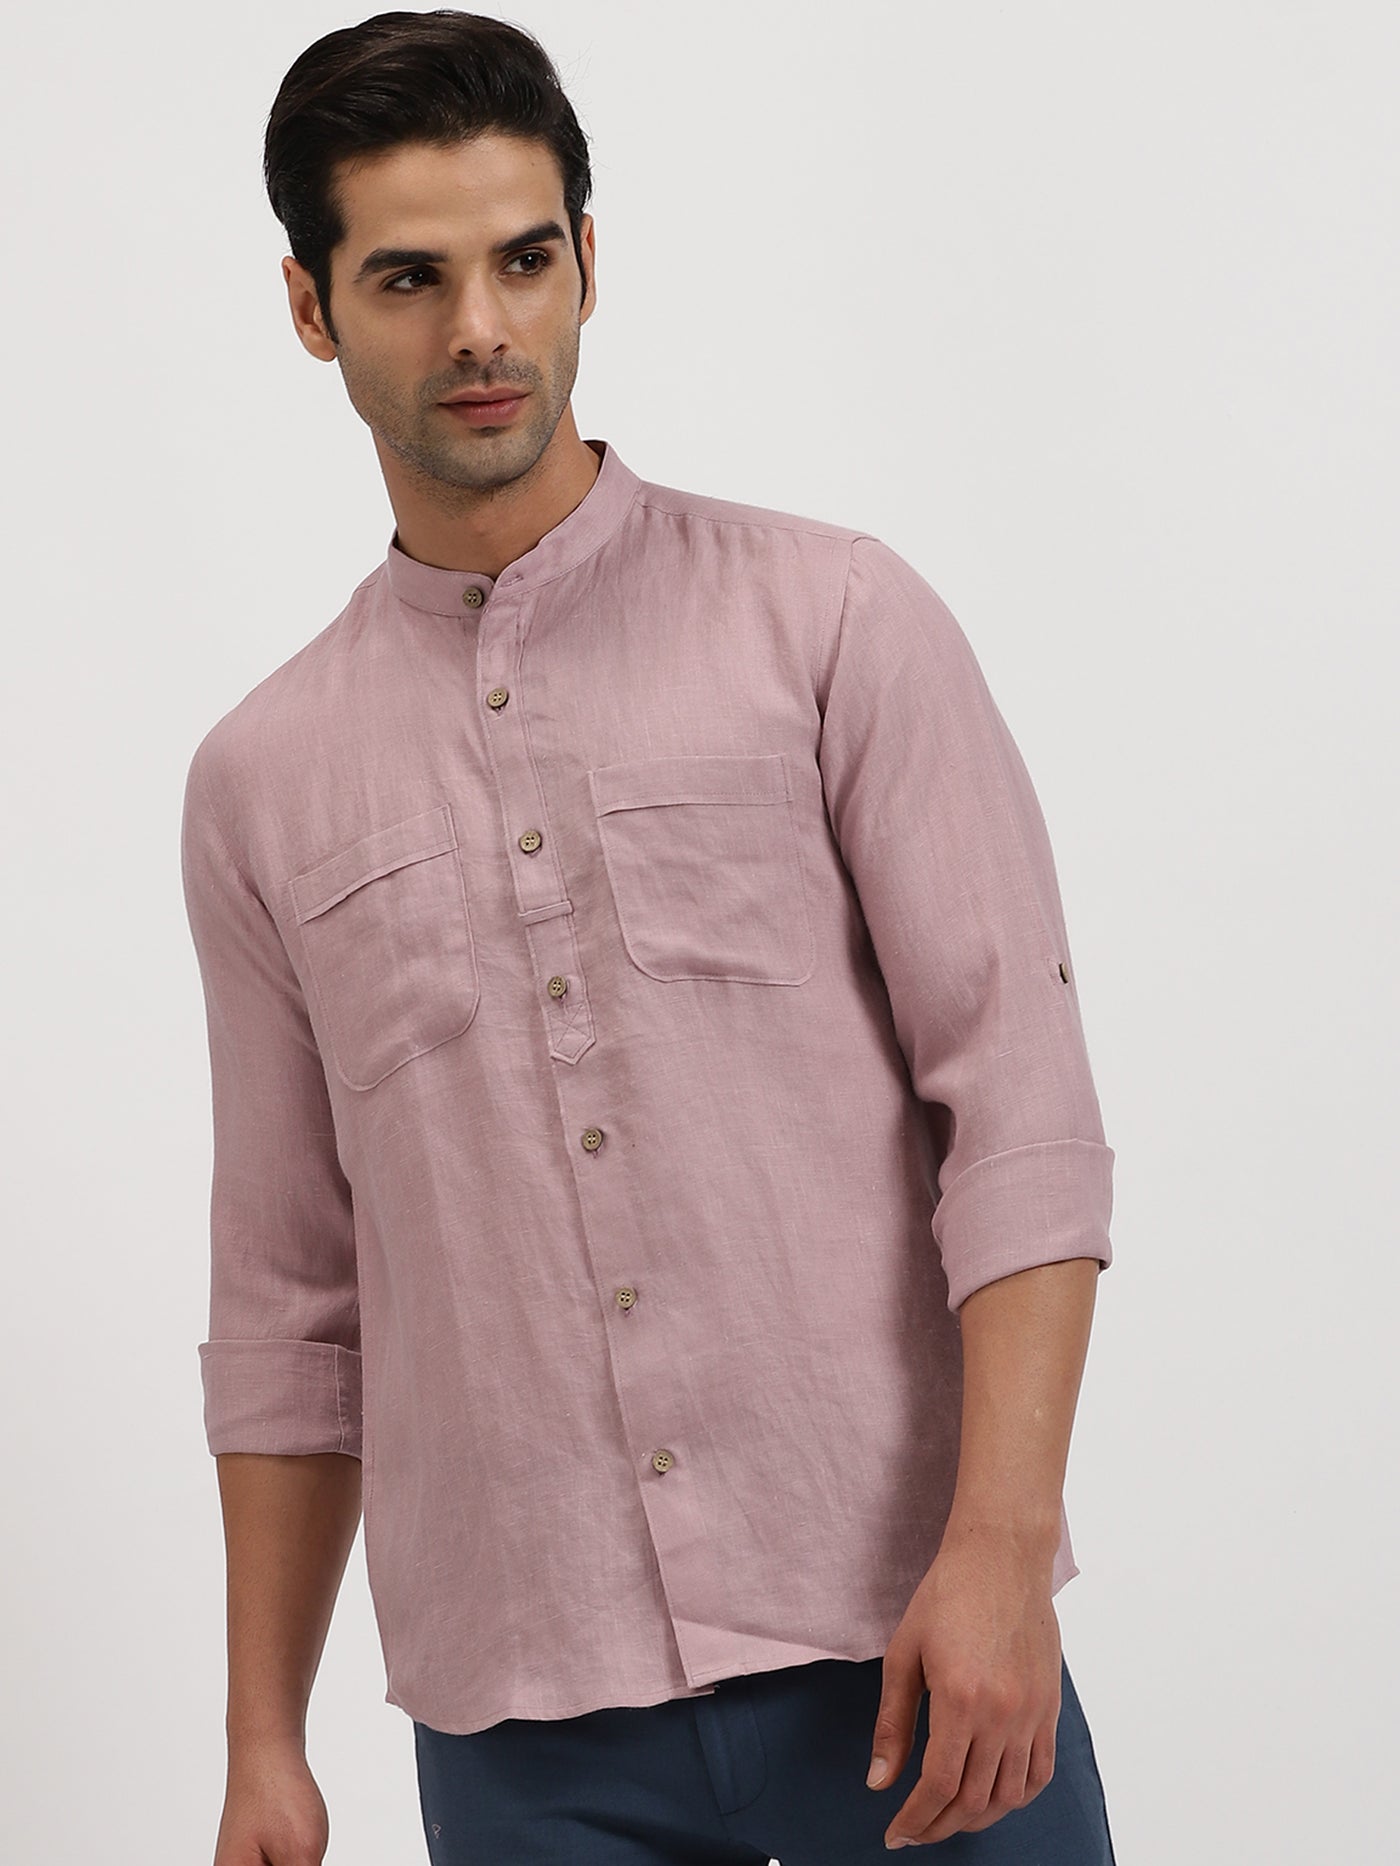 Luca - Pure Linen Double Pocket Full Sleeve Shirt - Lilac